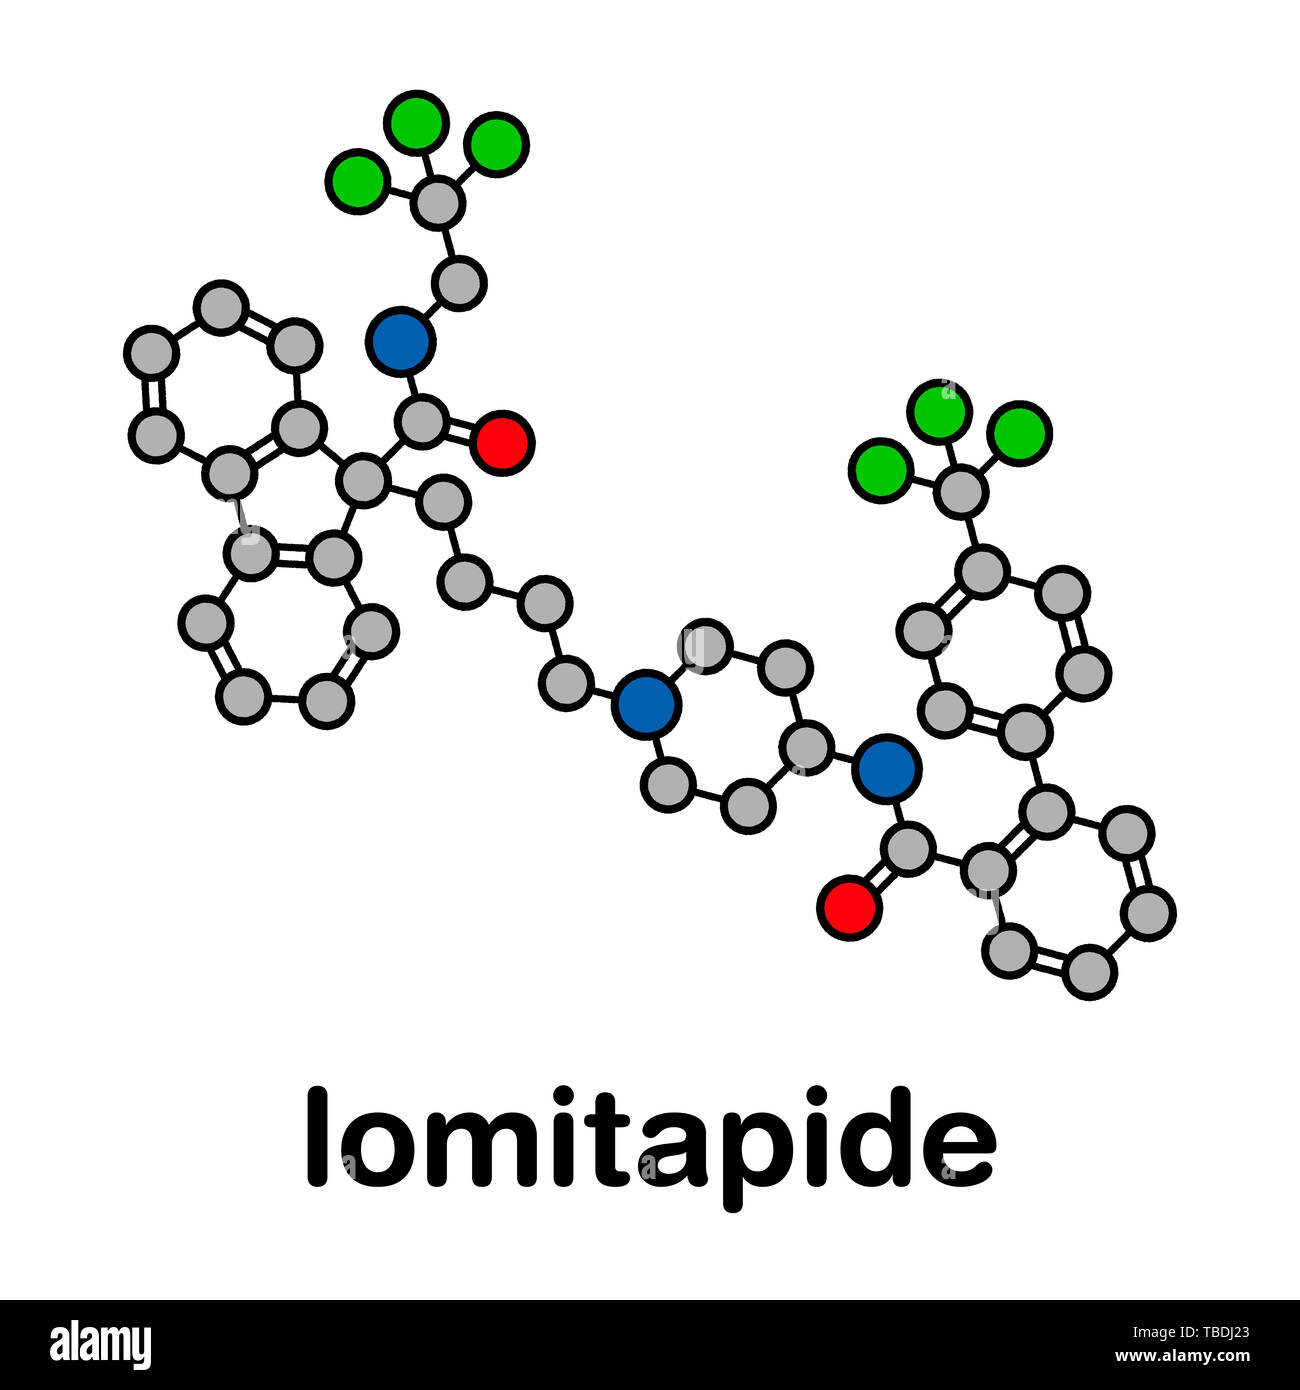 Lomitapide cholesterol lowering drug molecule. Used in treatment of homozygous familial hypercholesterolemia. Stylized skeletal formula (chemical structure). Atoms are shown as color-coded circles with thick black outlines and bonds: hydrogen (hidden), carbon (grey), oxygen (red), nitrogen (blue), fluorine (green). Stock Photo